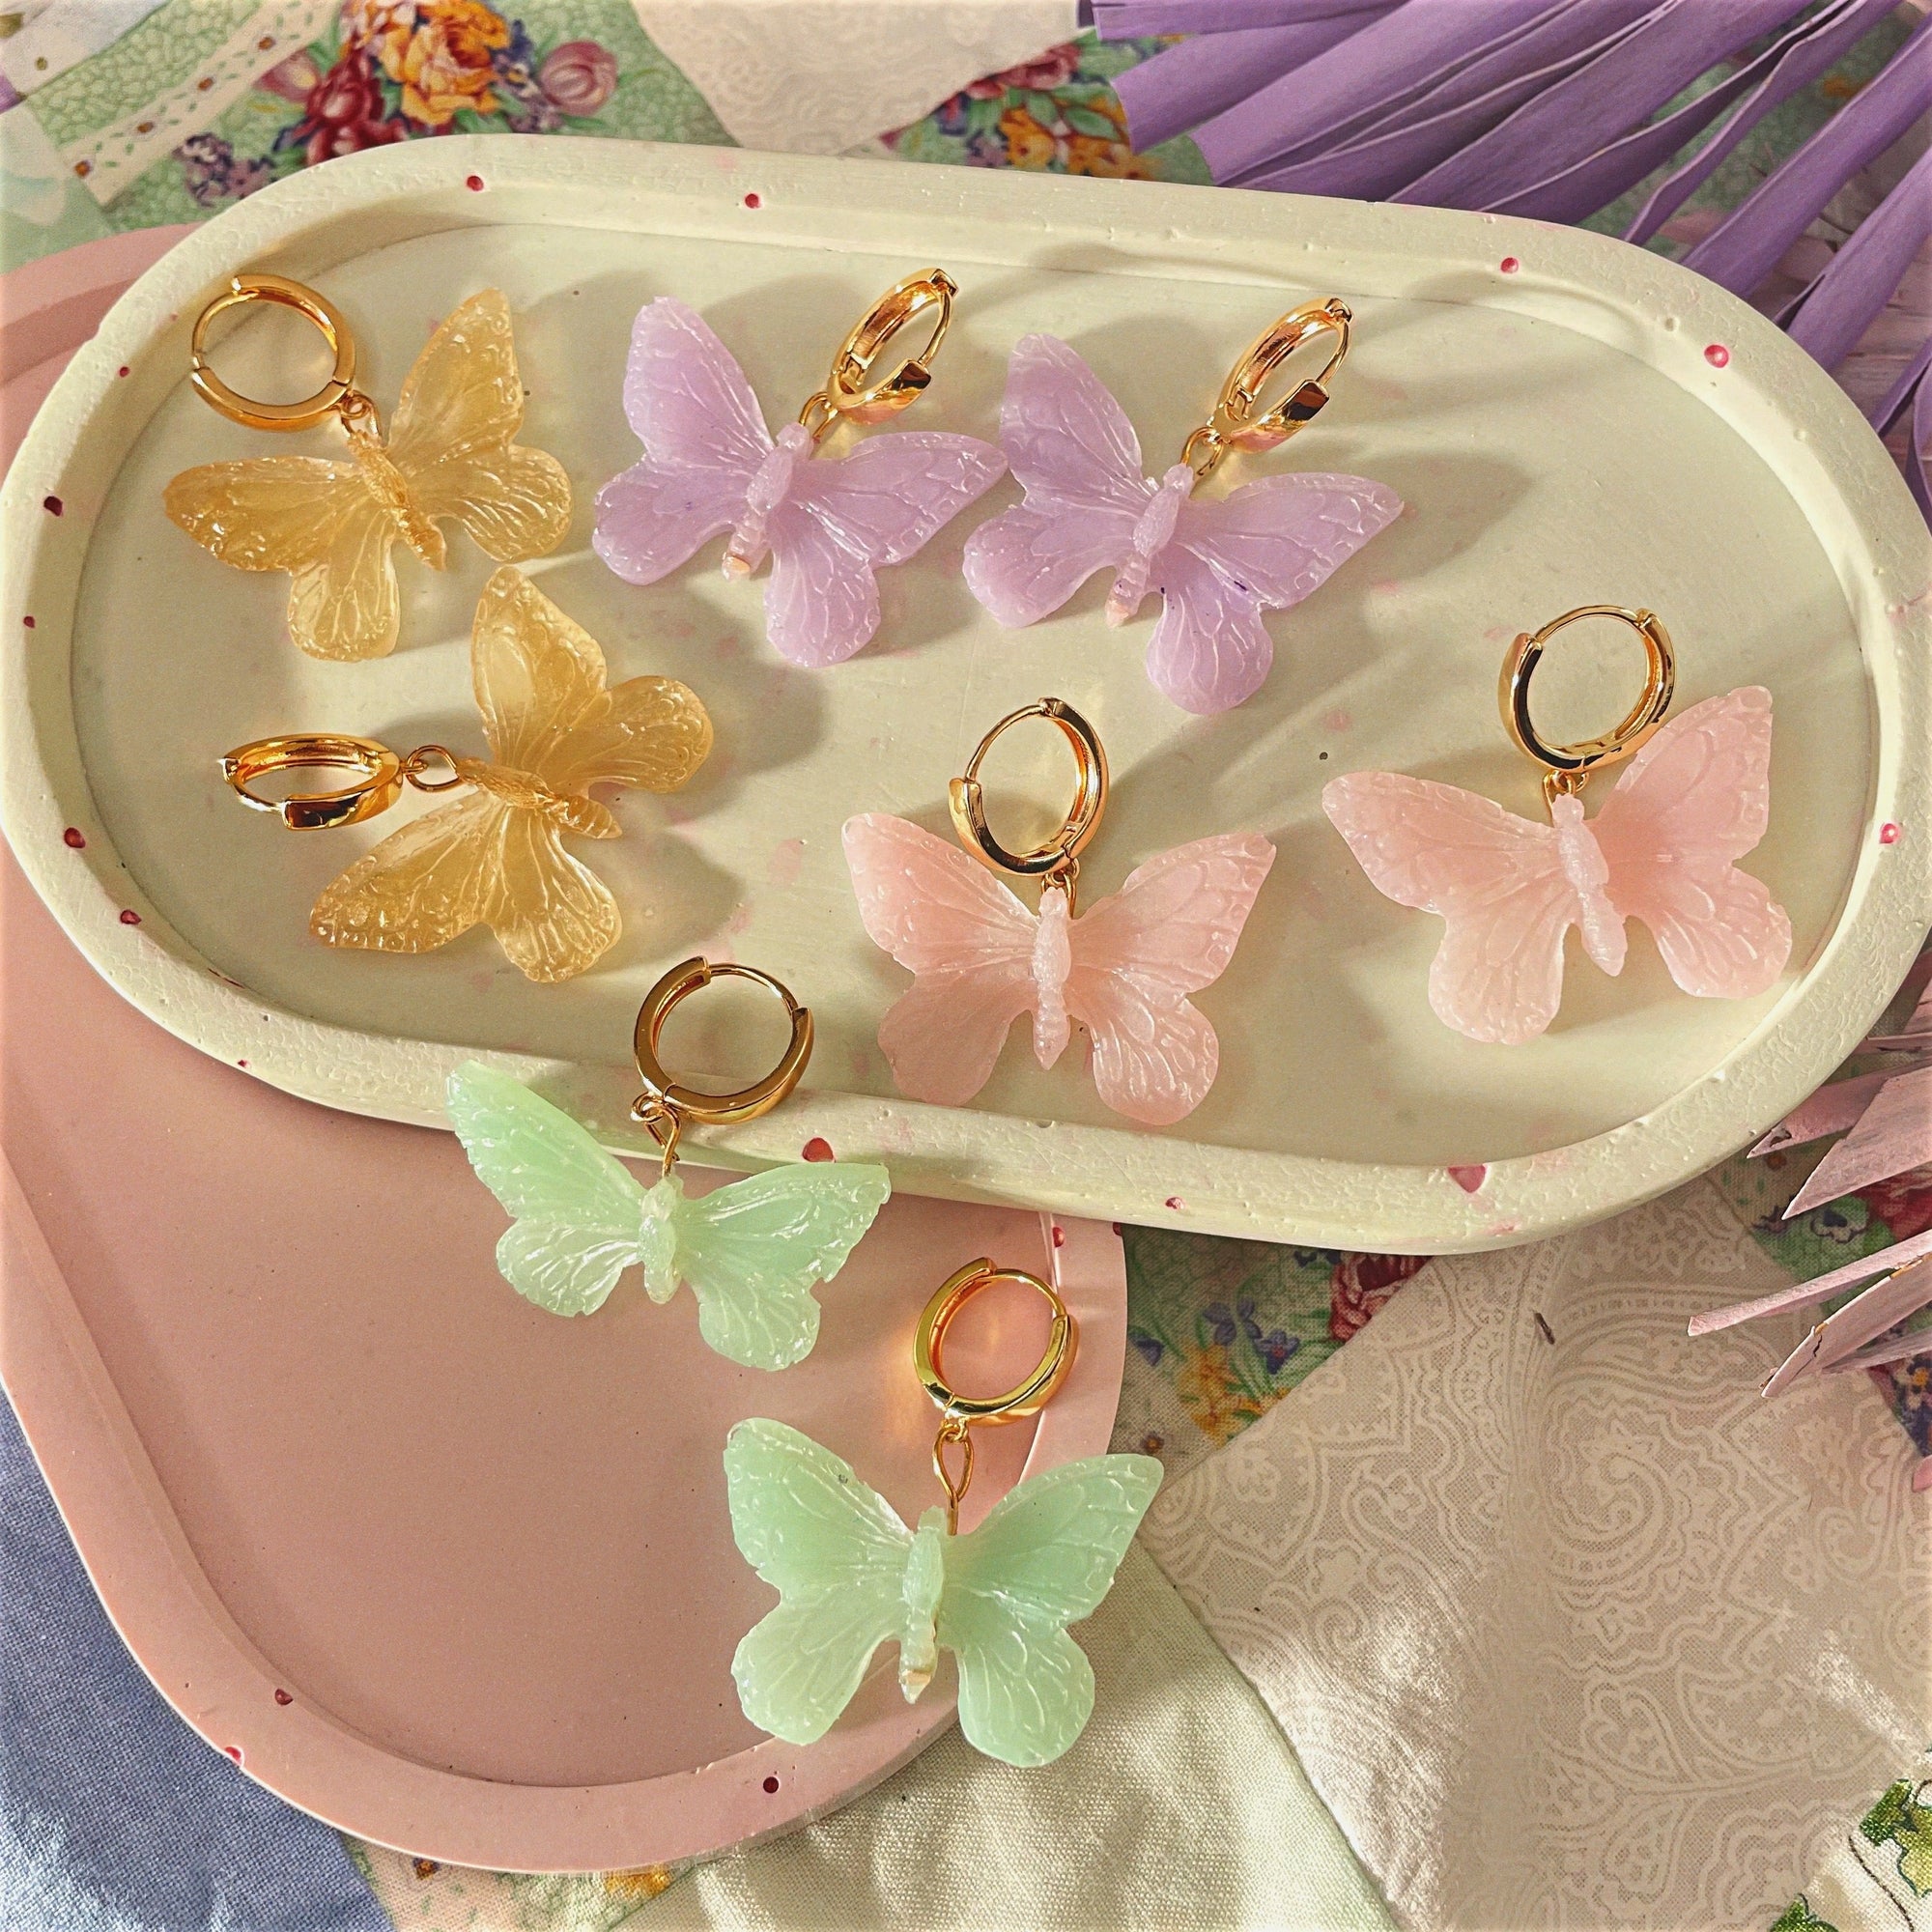 Handmade butterfly-shaped statement earrings crafted with polymer clay, featuring vibrant colors of pink, purple, gold, and green, displayed on trays.